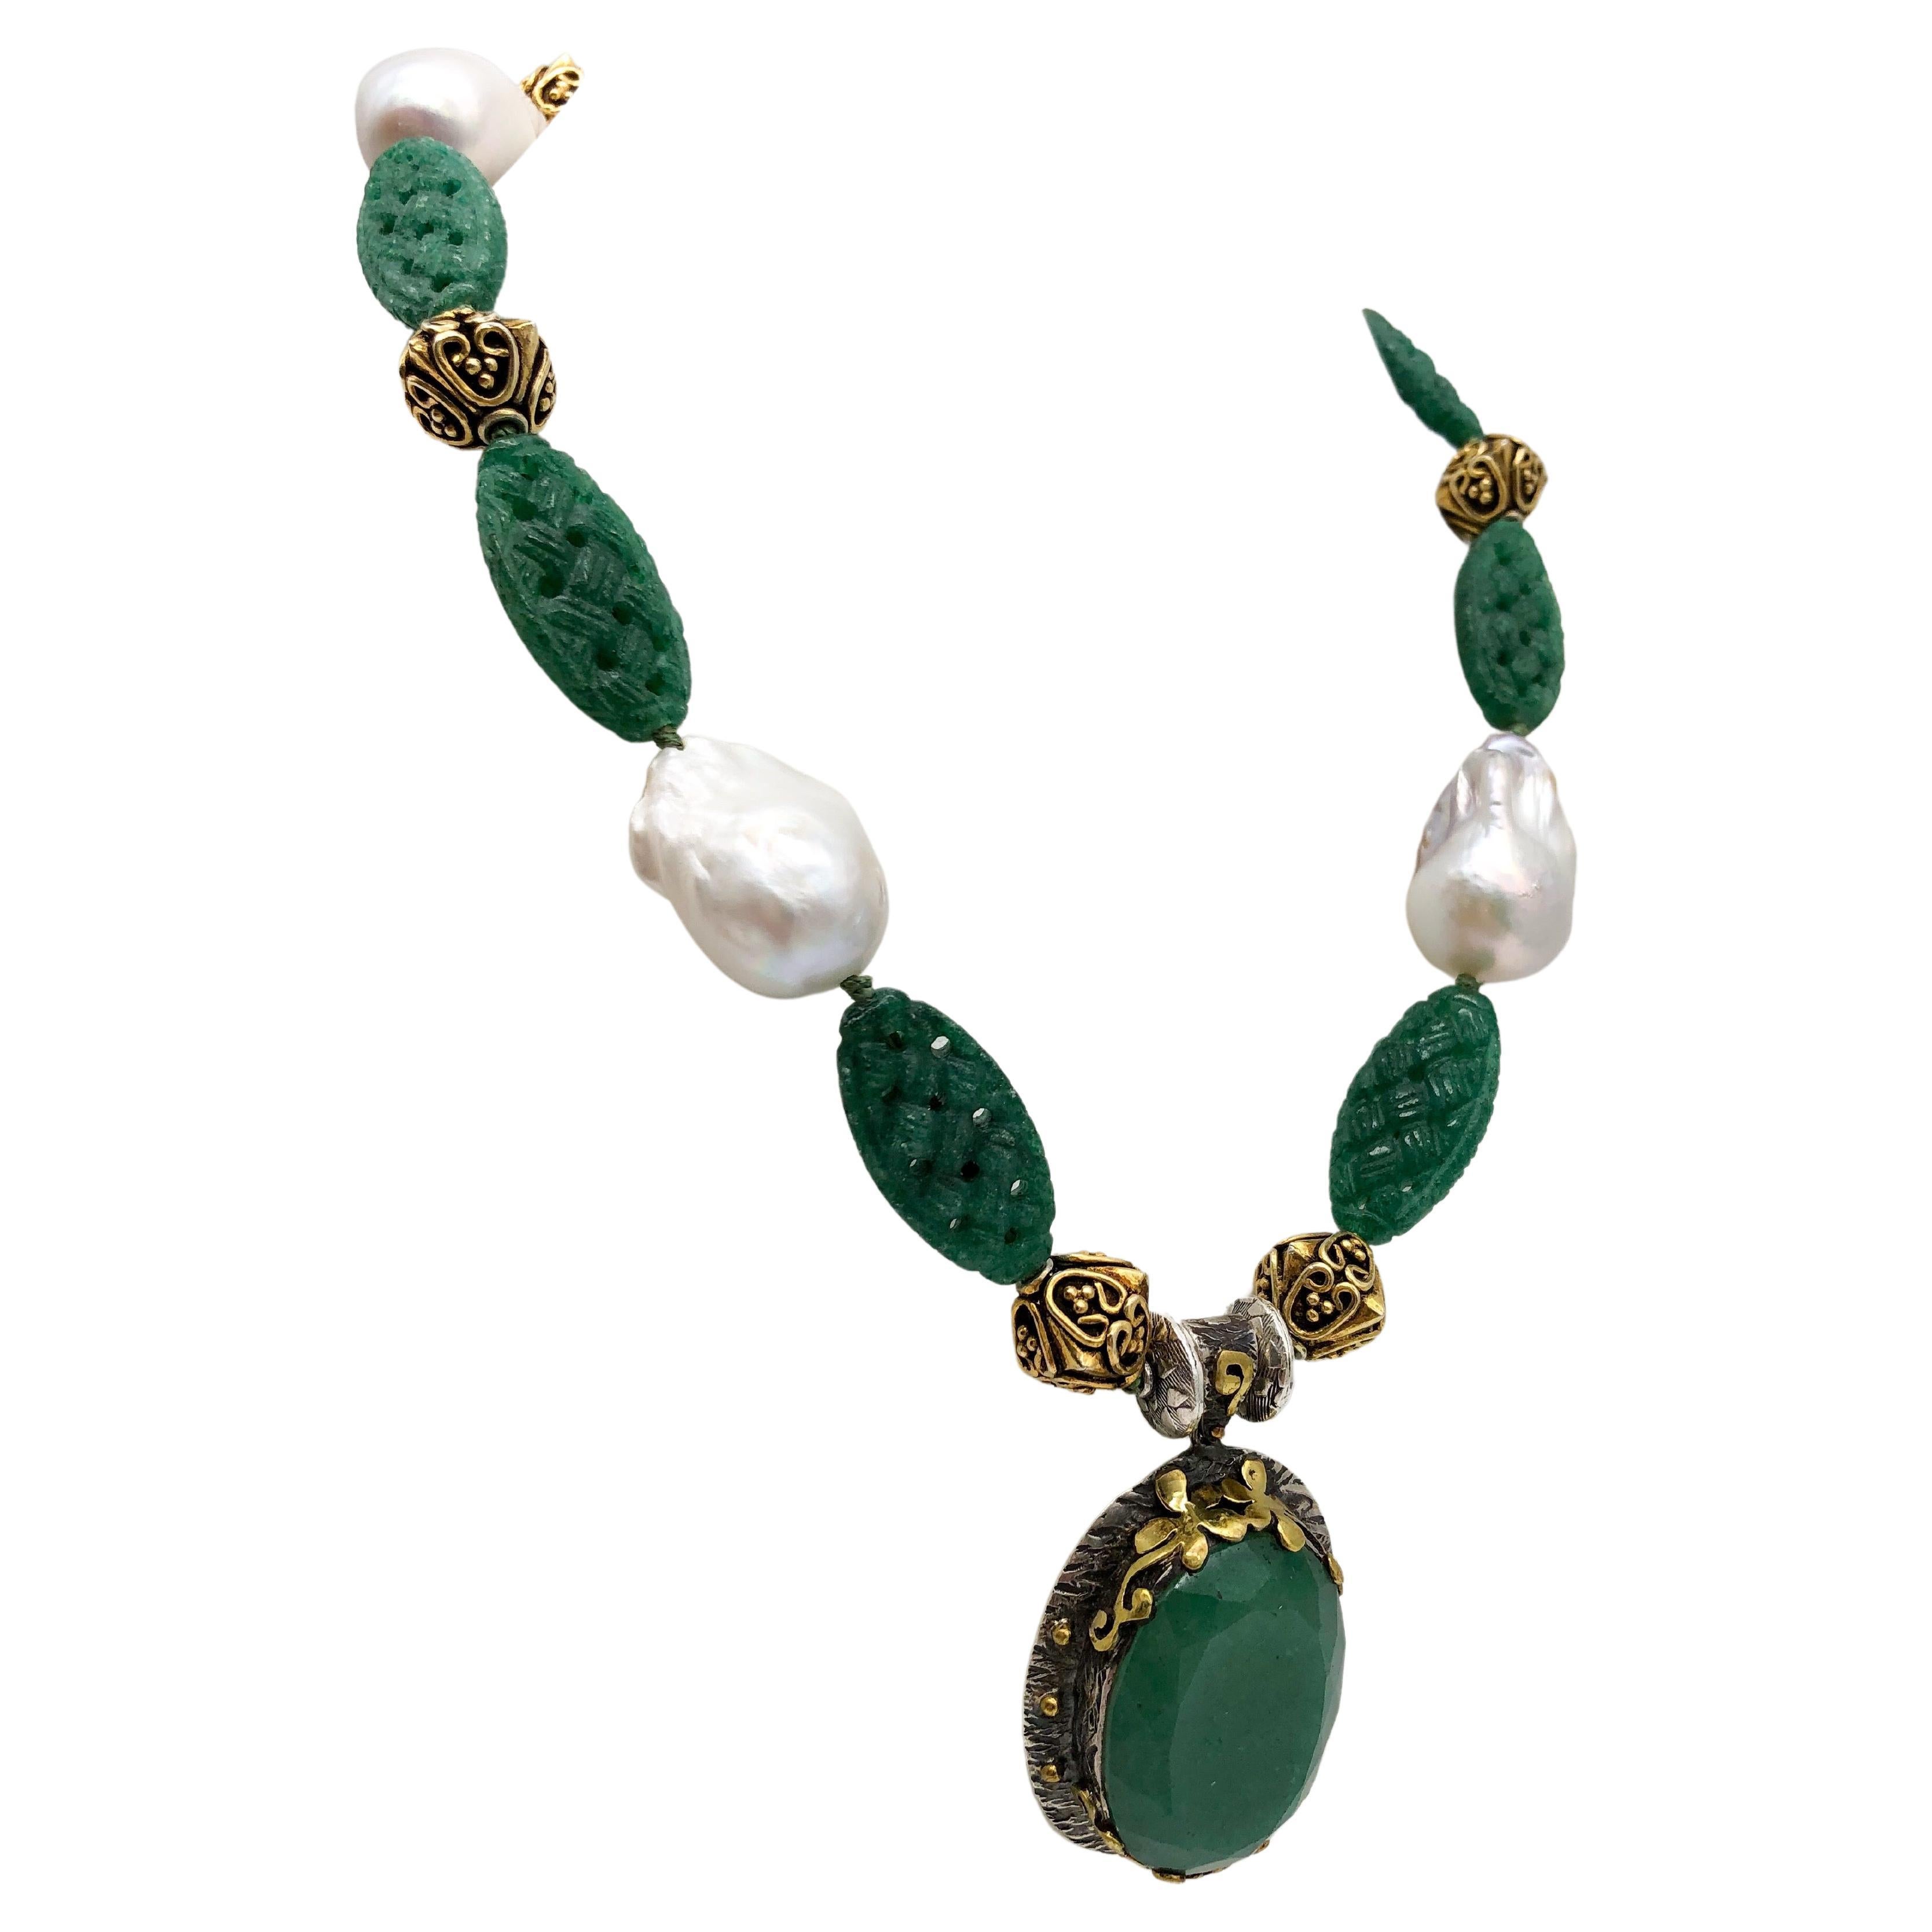 A.Jeschel Handcrafted polished large Aventurine pendant necklace For Sale